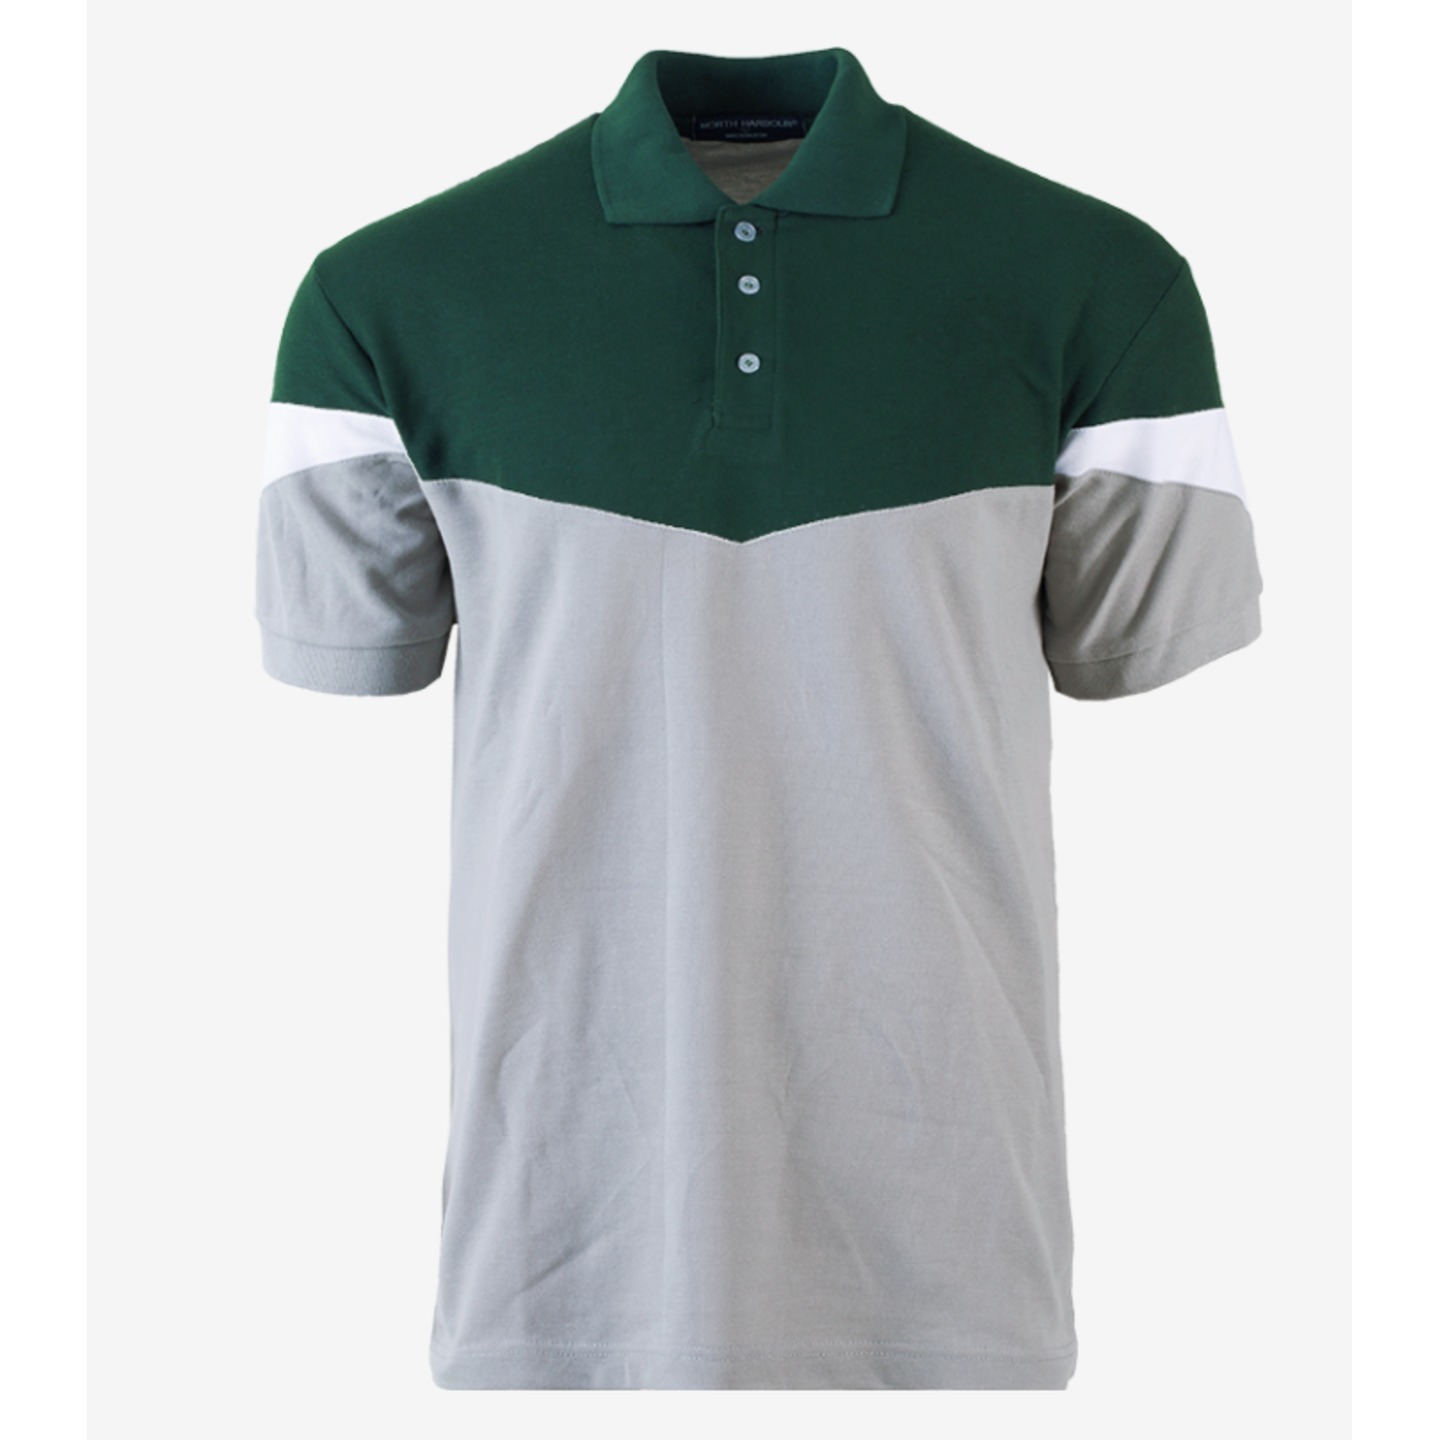 North Harbour Adley Polo